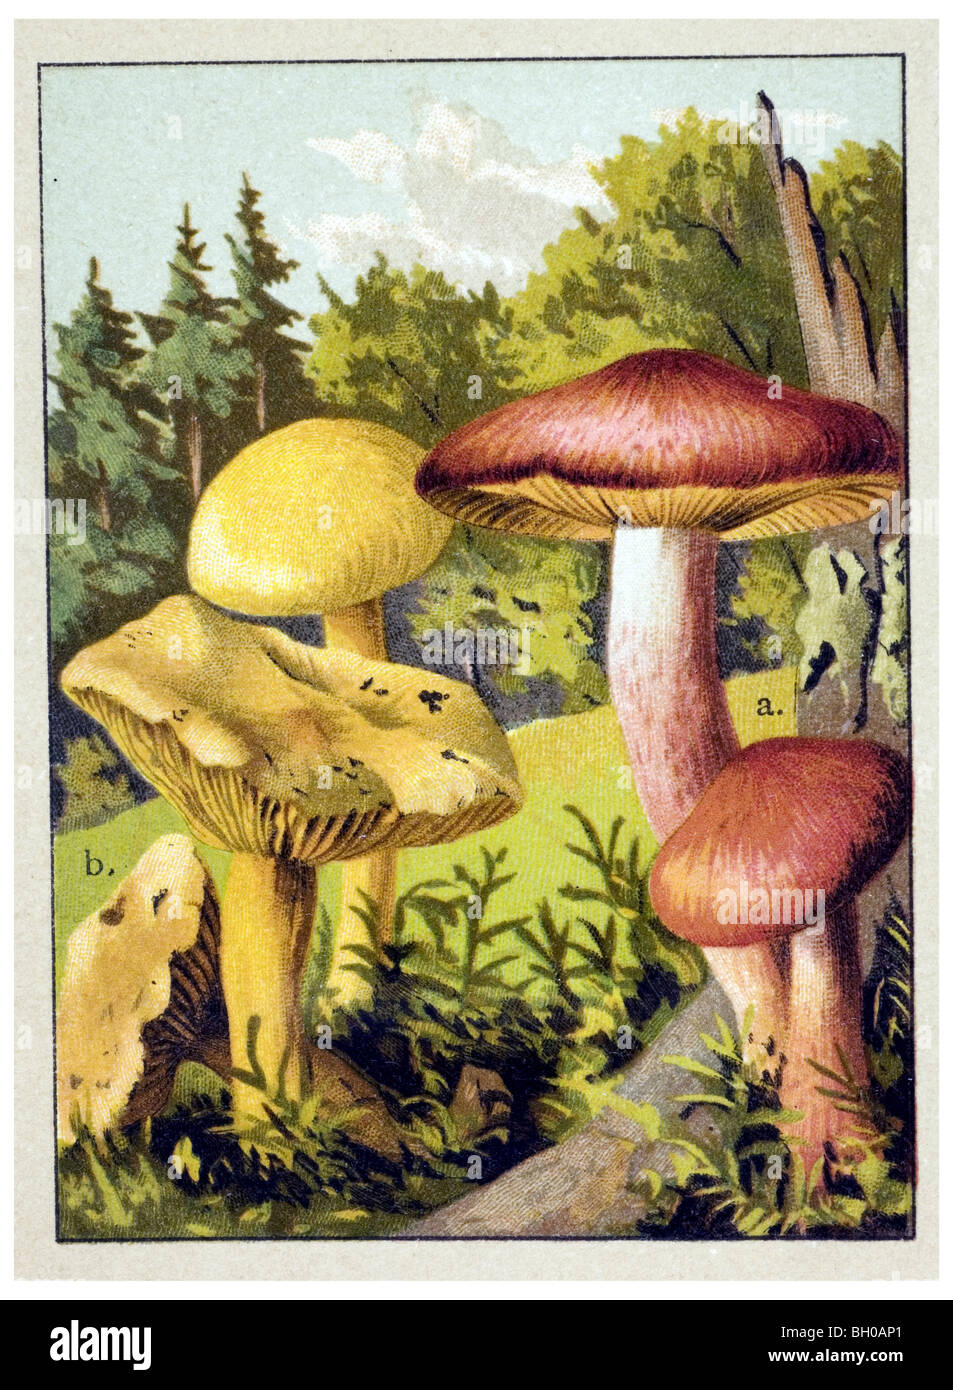 Plums and Custard, Red-haired agaric, sulphur knight, gas agaric mushroom toadstool, fungus Stock Photo